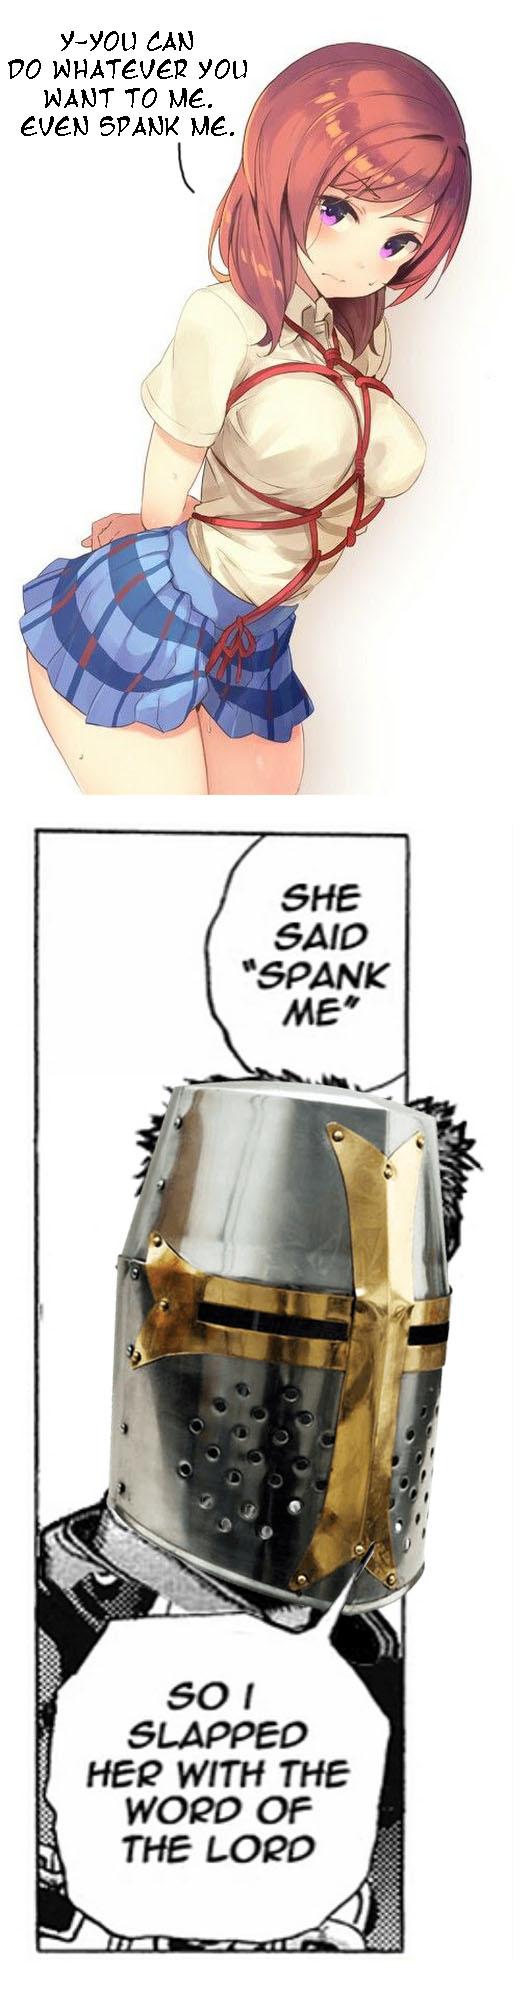 She says she will spank me